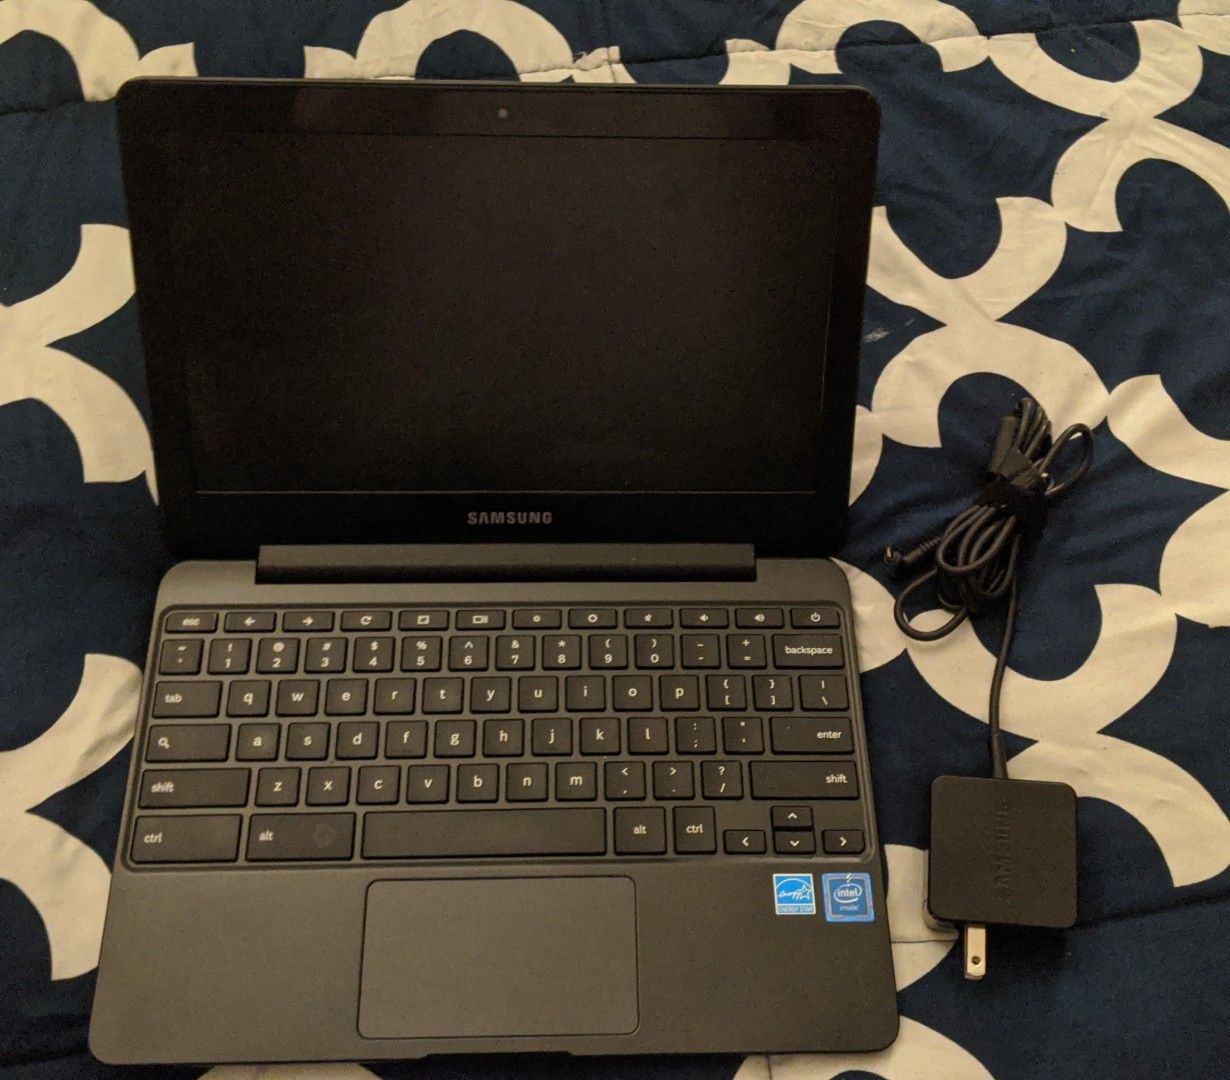 Samsung chromebook amazing like new durable and works great